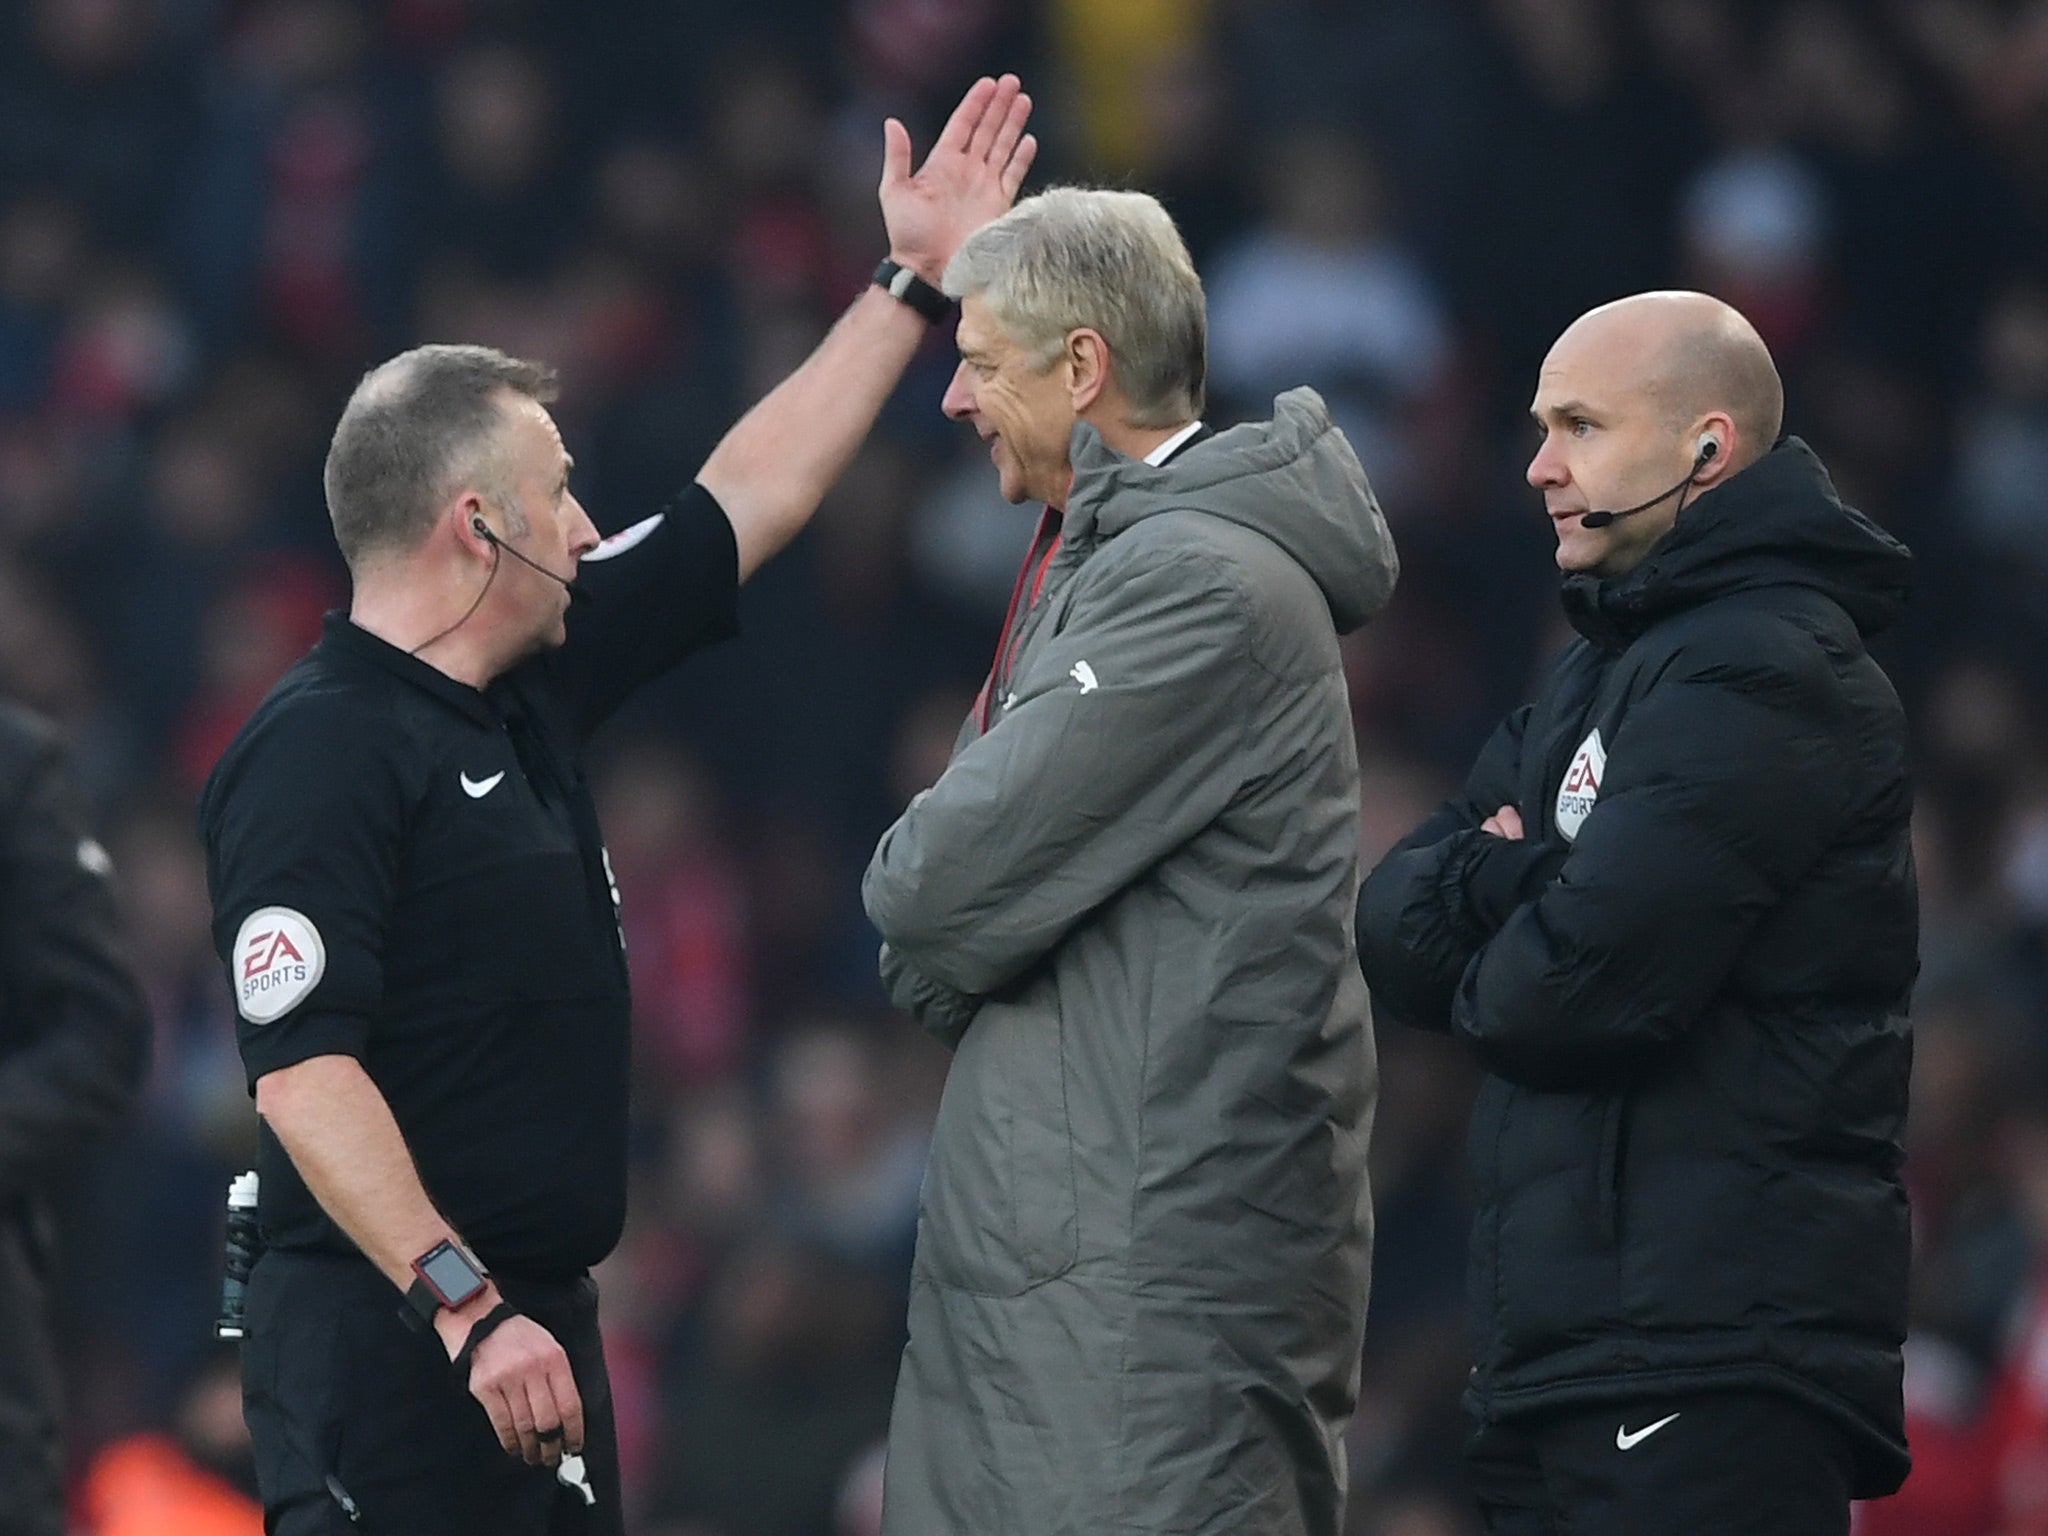 Arsene Wenger was sent to the stands for his protests against Burnley's penalty